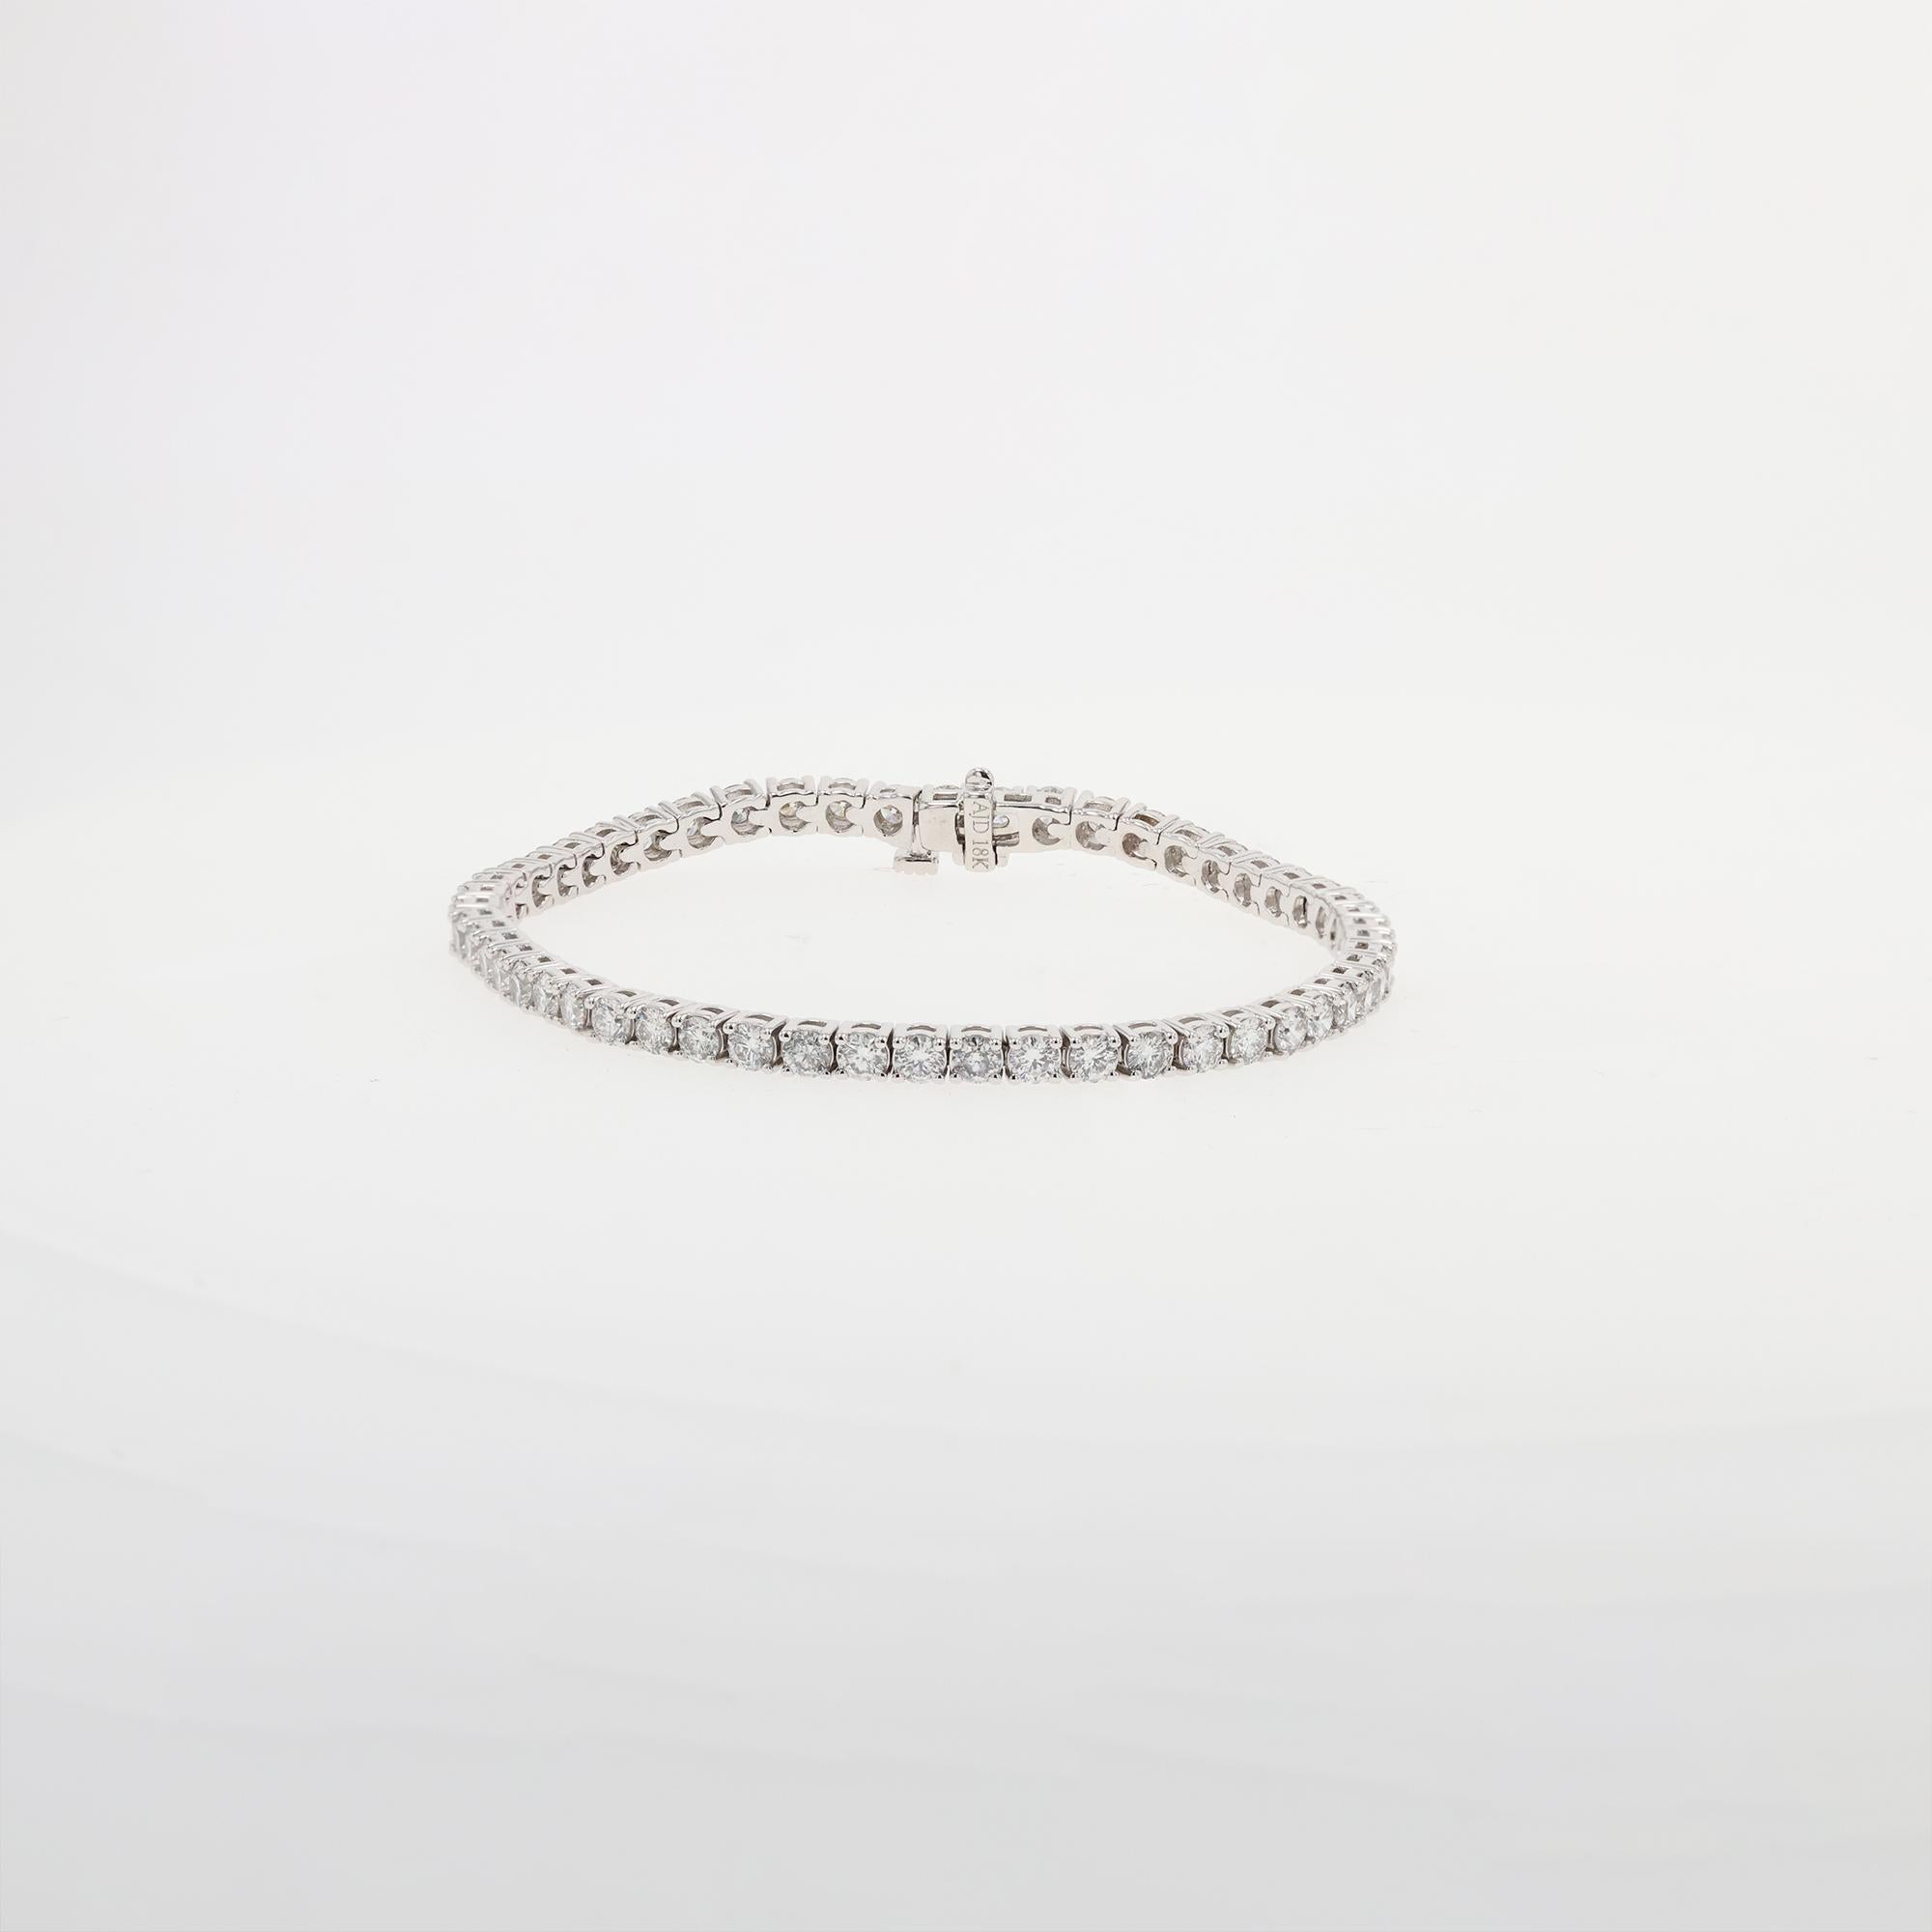 Vintage 18 karat white gold Diamond line bracelet with 53 round brilliant cut diamonds. The diamonds are G-H in color and SI1 in clarity. The diamonds are prong set with 4 prongs and an open wire mounting. 